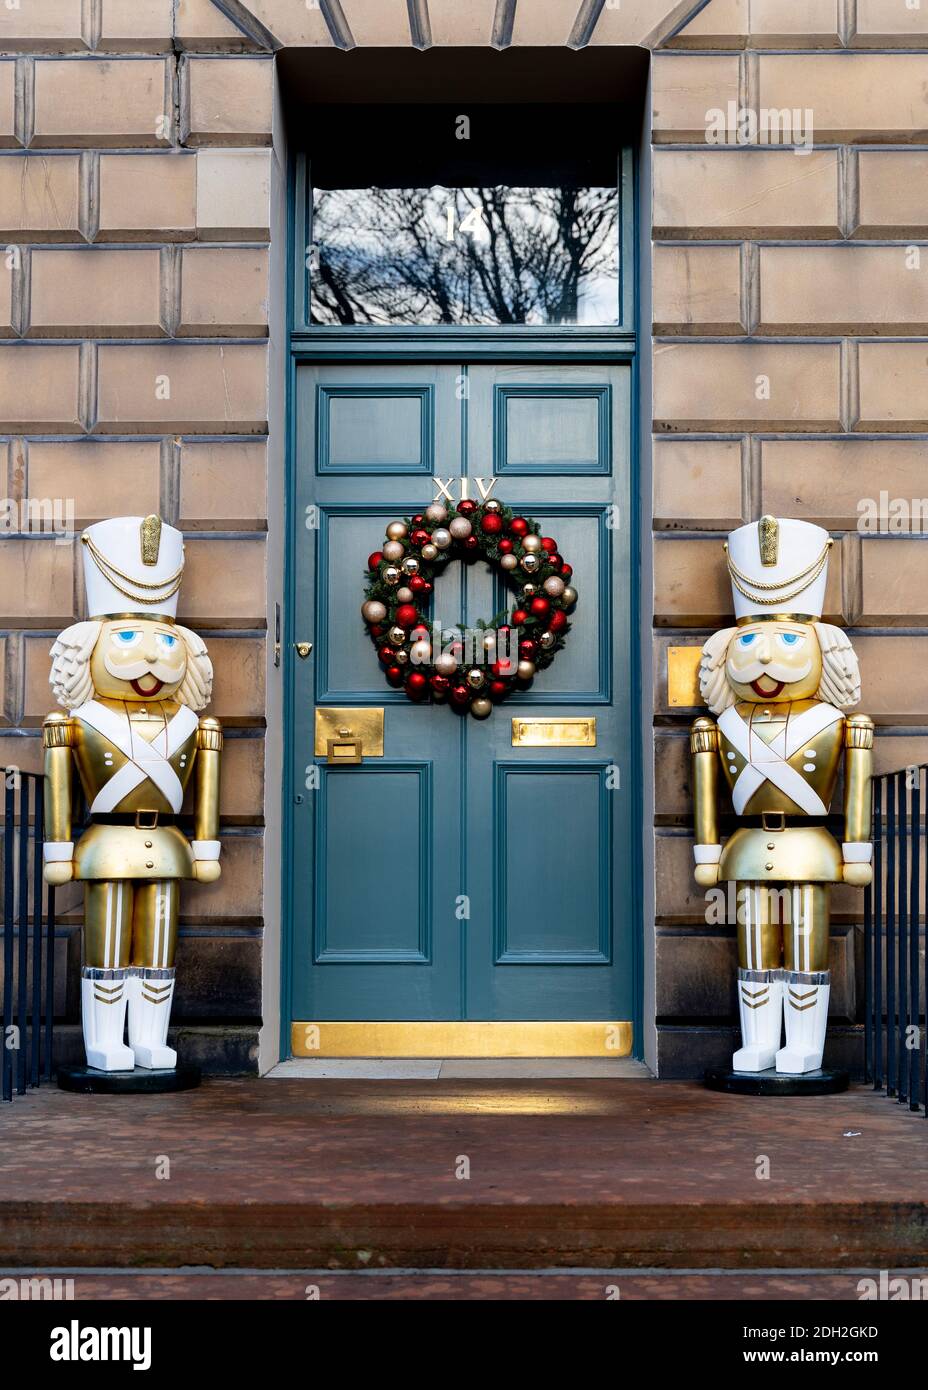 Detail of traditional Christmas wreath and large decorative statues at front door of house in New Town of Edinburgh, Scotland, UK Stock Photo